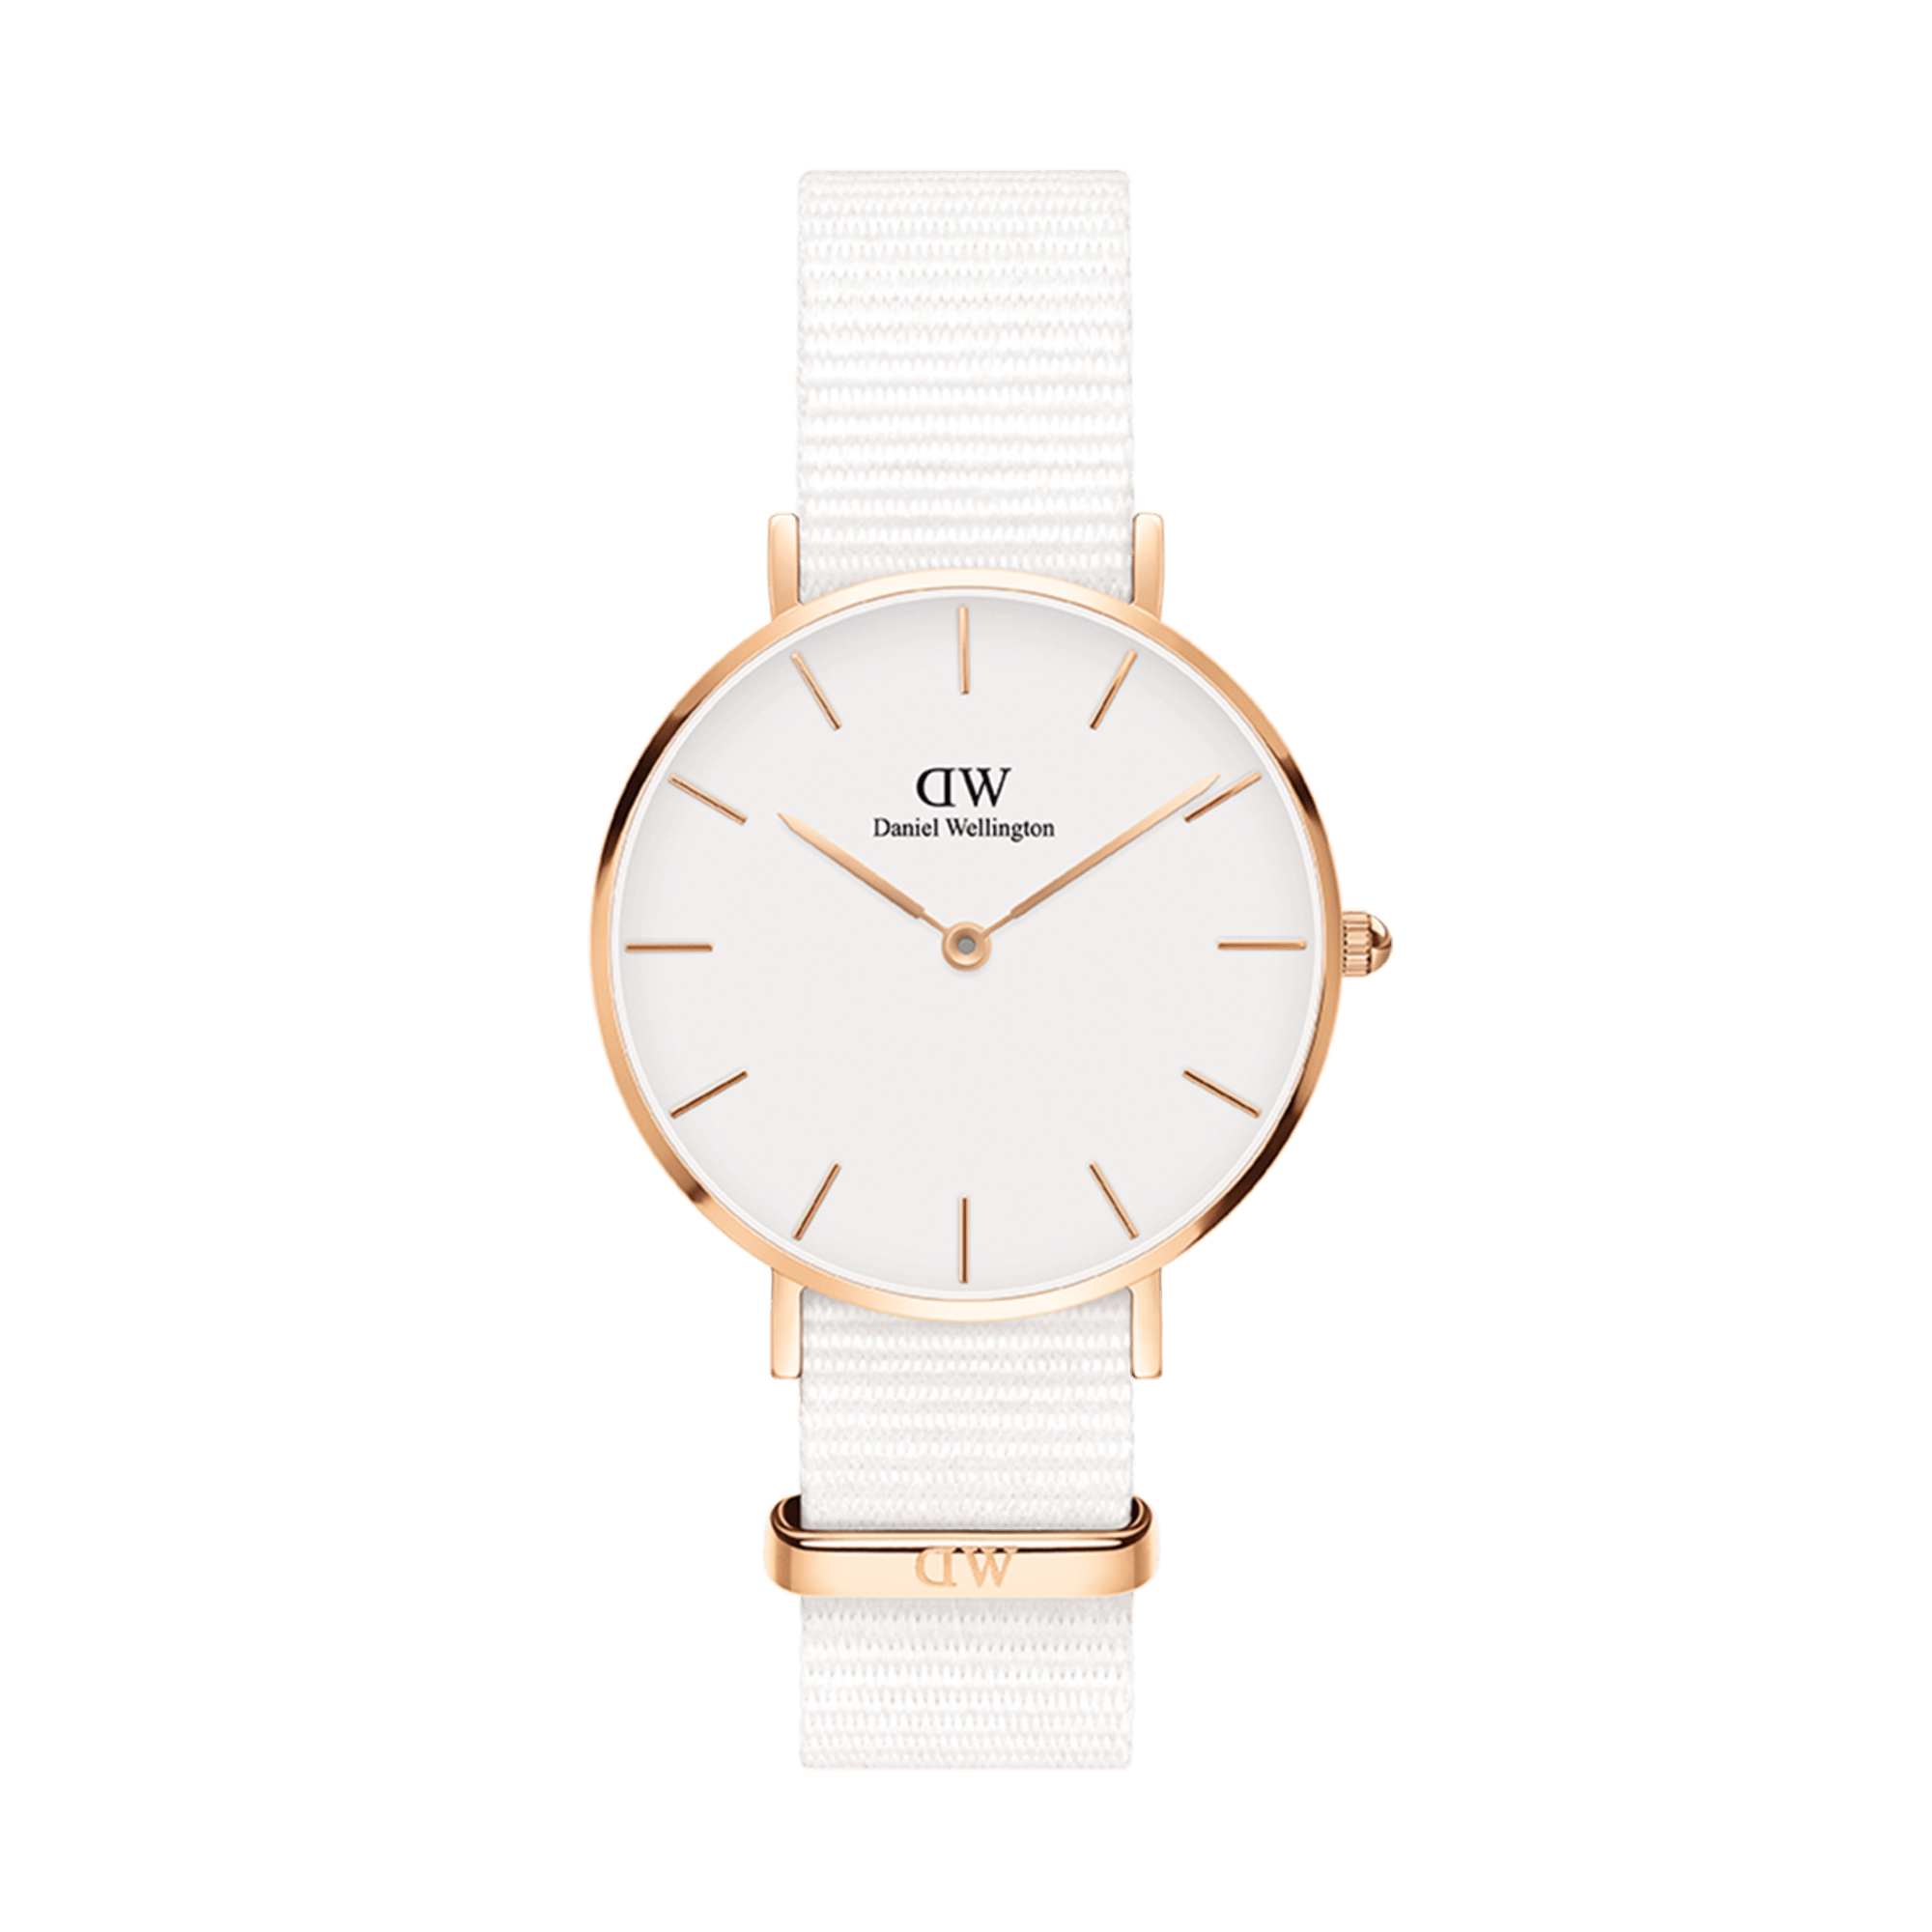 Petite Dover - Small white watch with rose gold details | DW